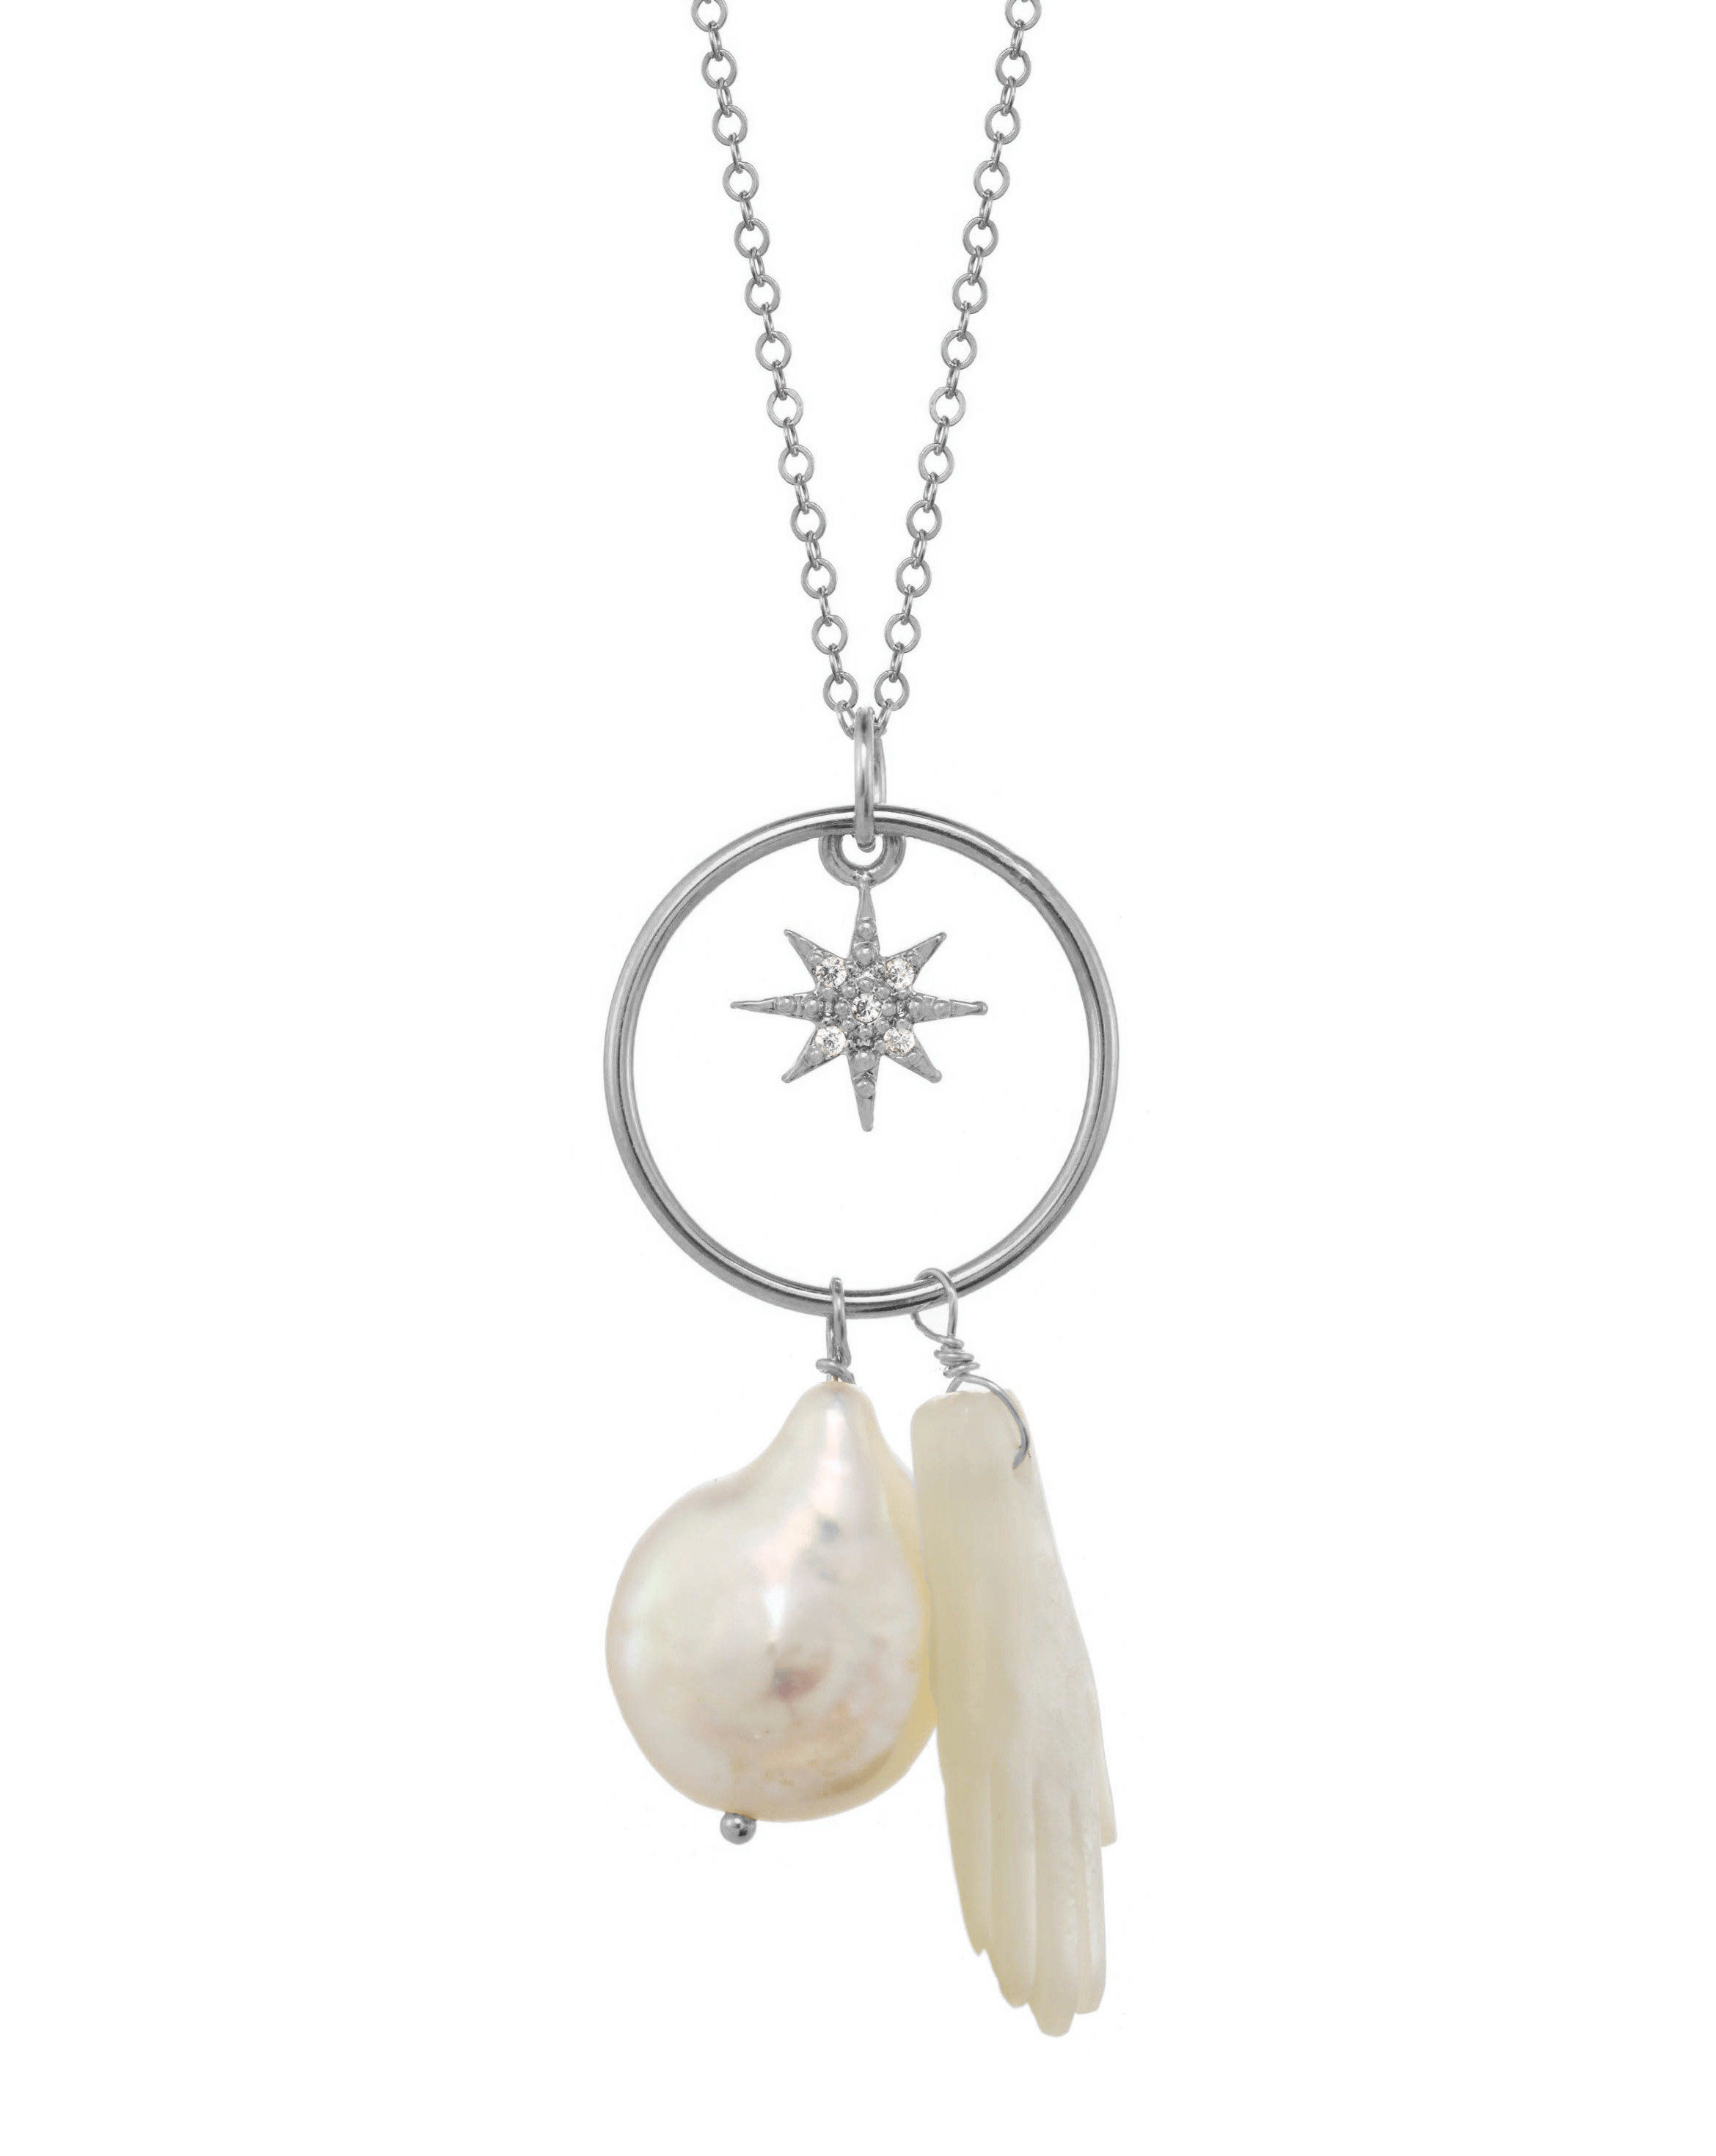 Astera Necklace by KOZAKH. An 18 to 20 inch adjustable length necklace in Sterling Silver, featuring a hand carved Mother of Pearl hand charm, a Baroque Pearl, and a Cubic Zirconia star charm.